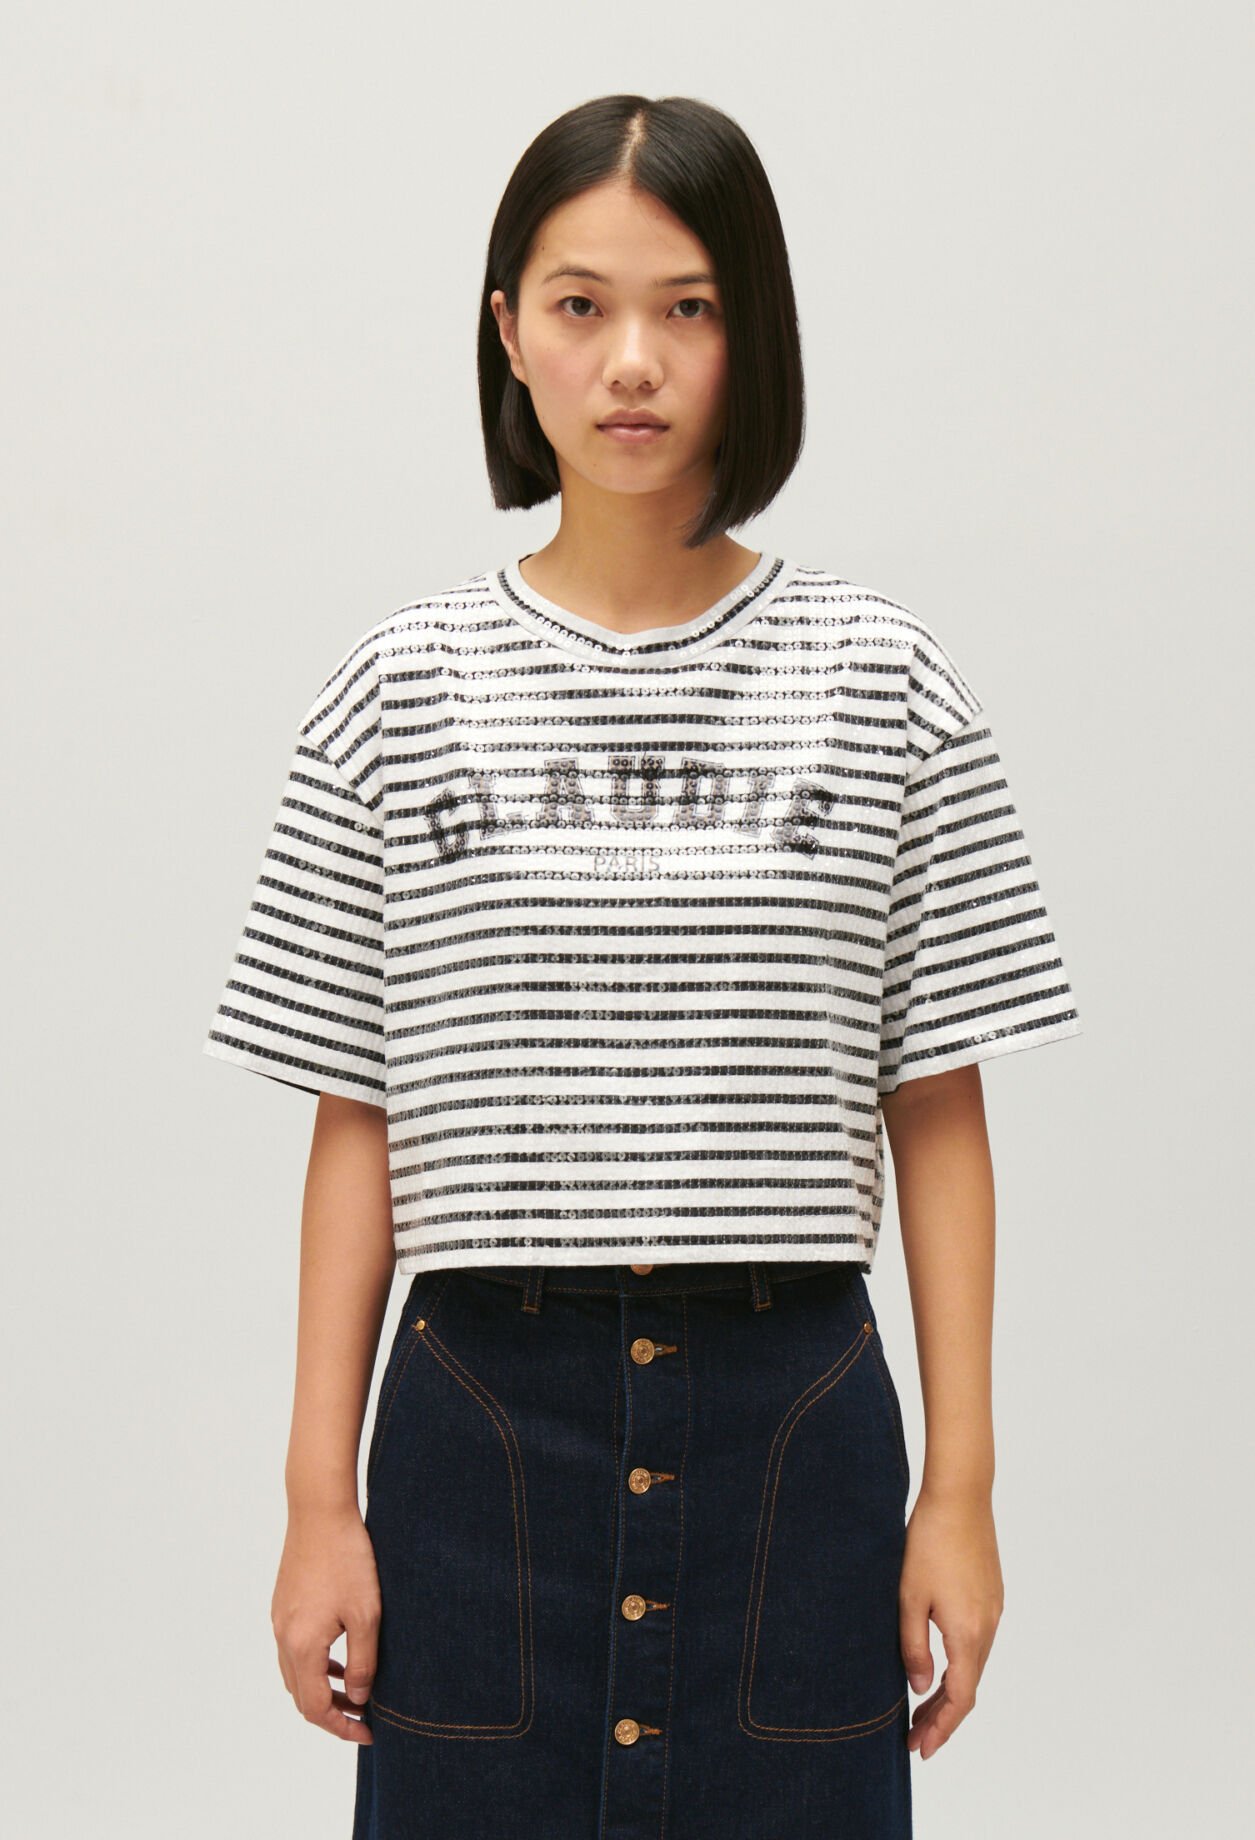 Striped T-shirt with two-tone sequins